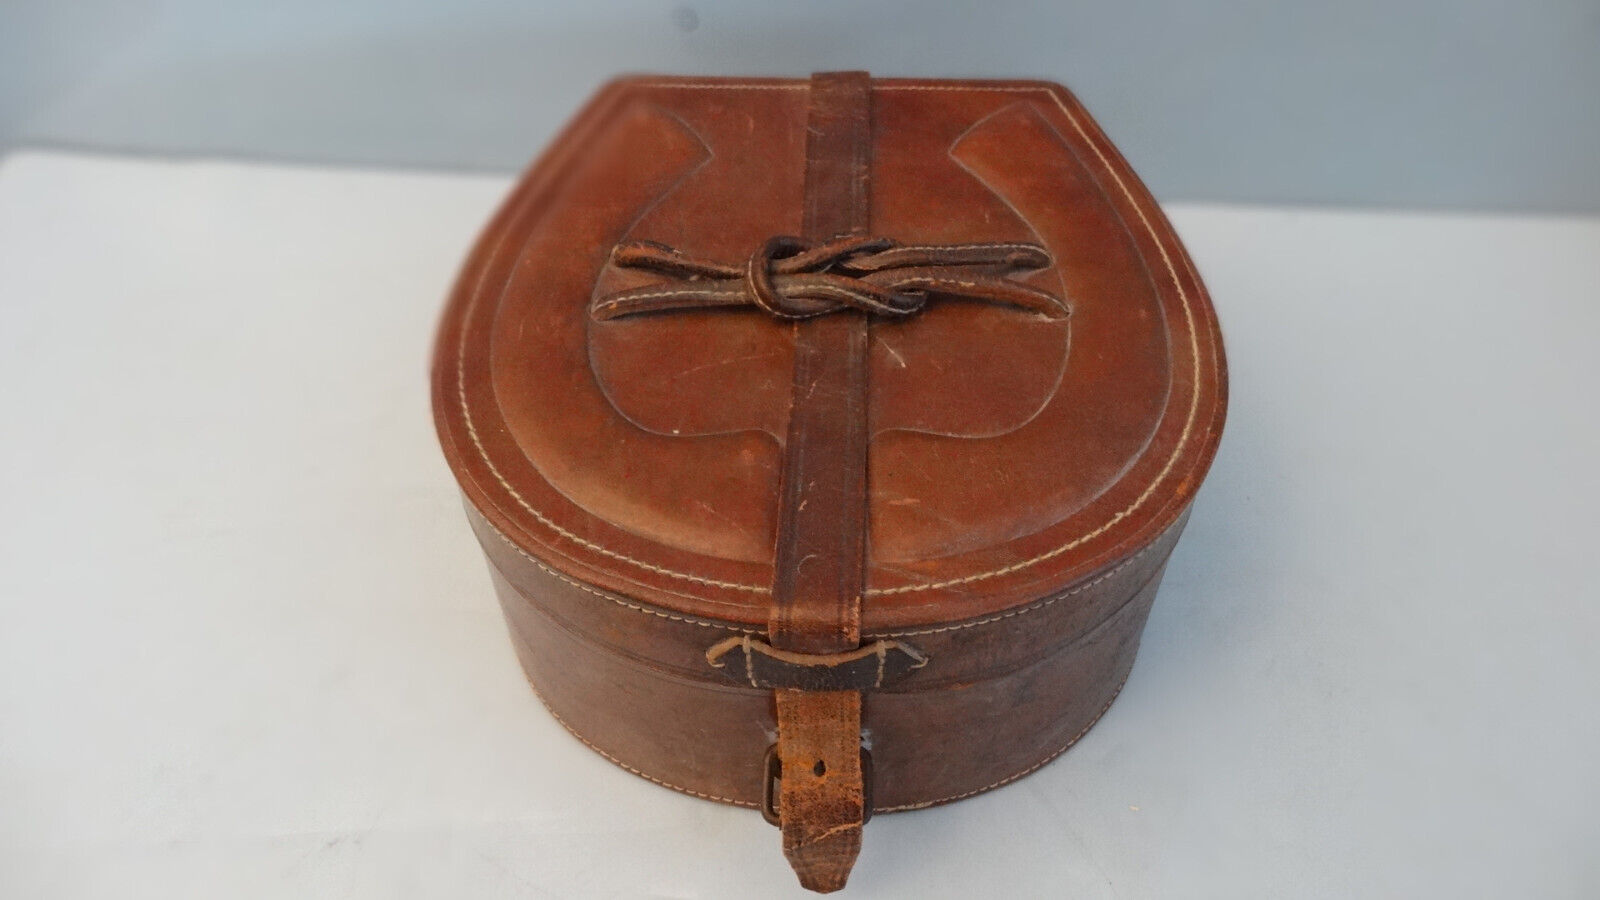 RARE ANTIQUE 19TH CENTURY LEATHER STORAGE BOX with SMALL JEWELRY BOX